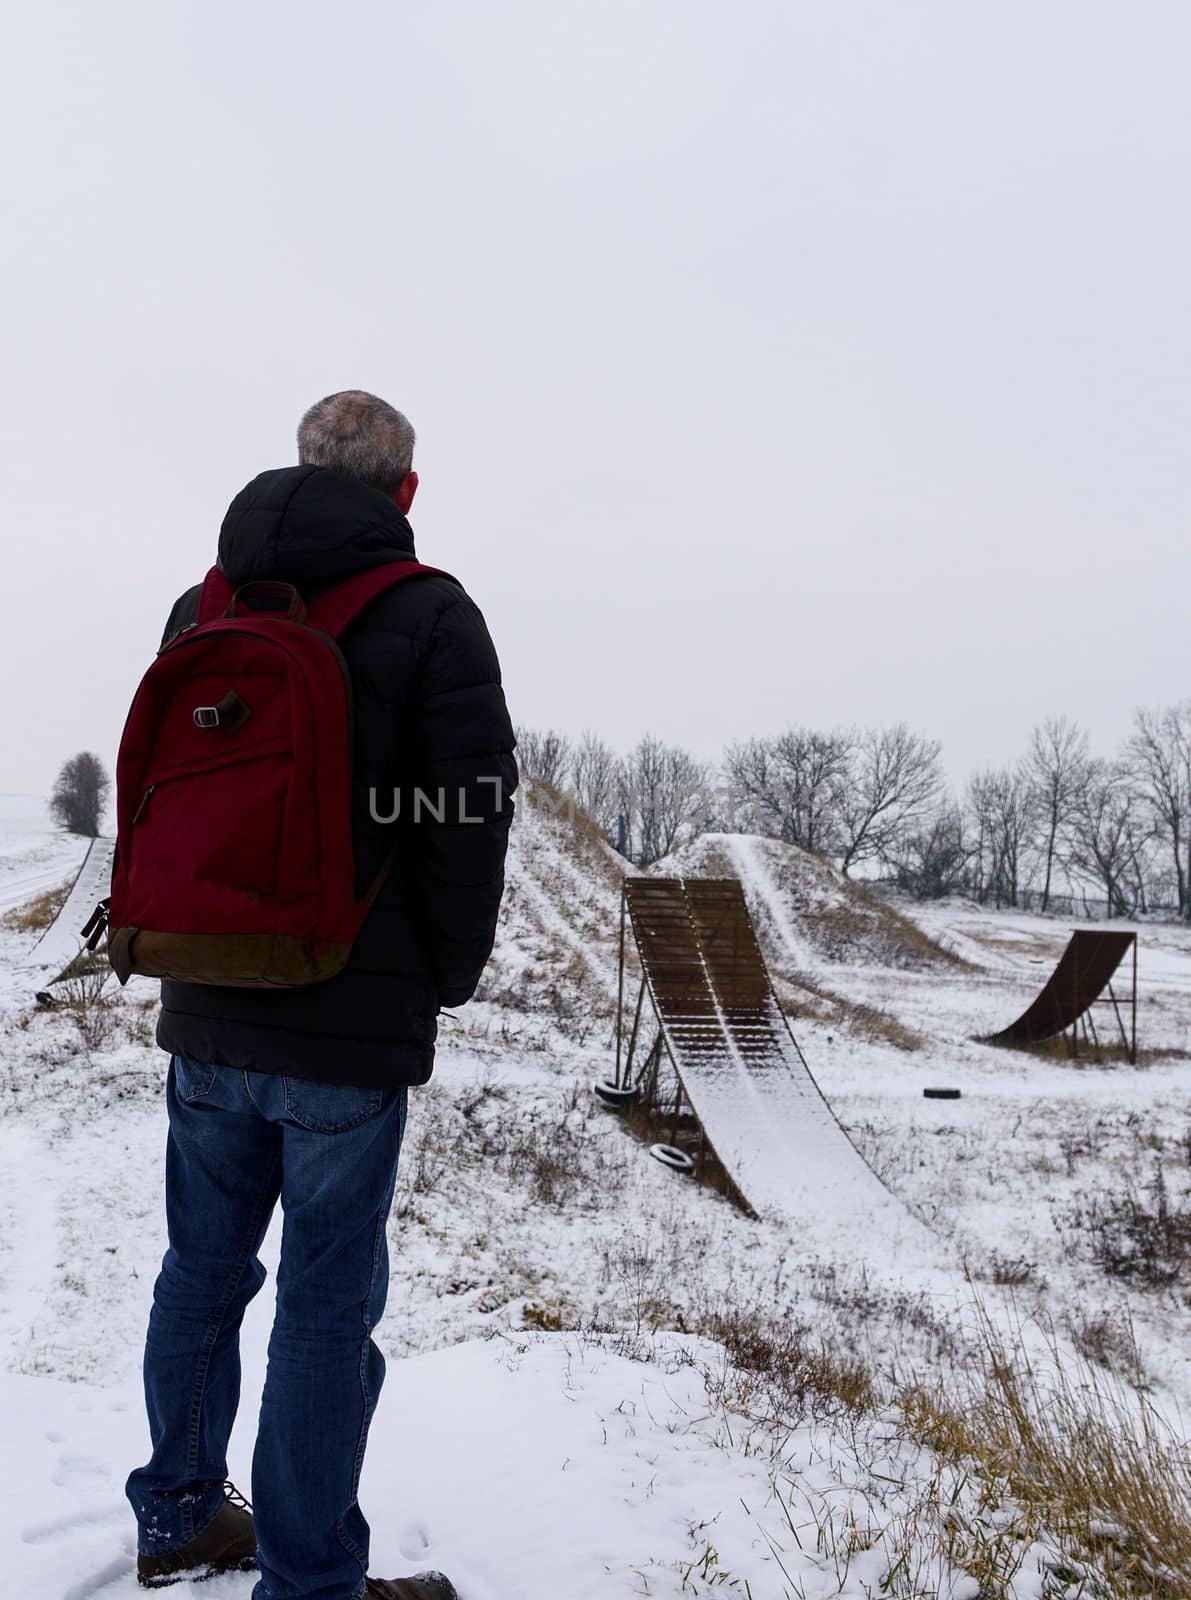 Middle age man standing in beautiful winter landscape . Man viewing on abandoned freestyle motocross ramps.